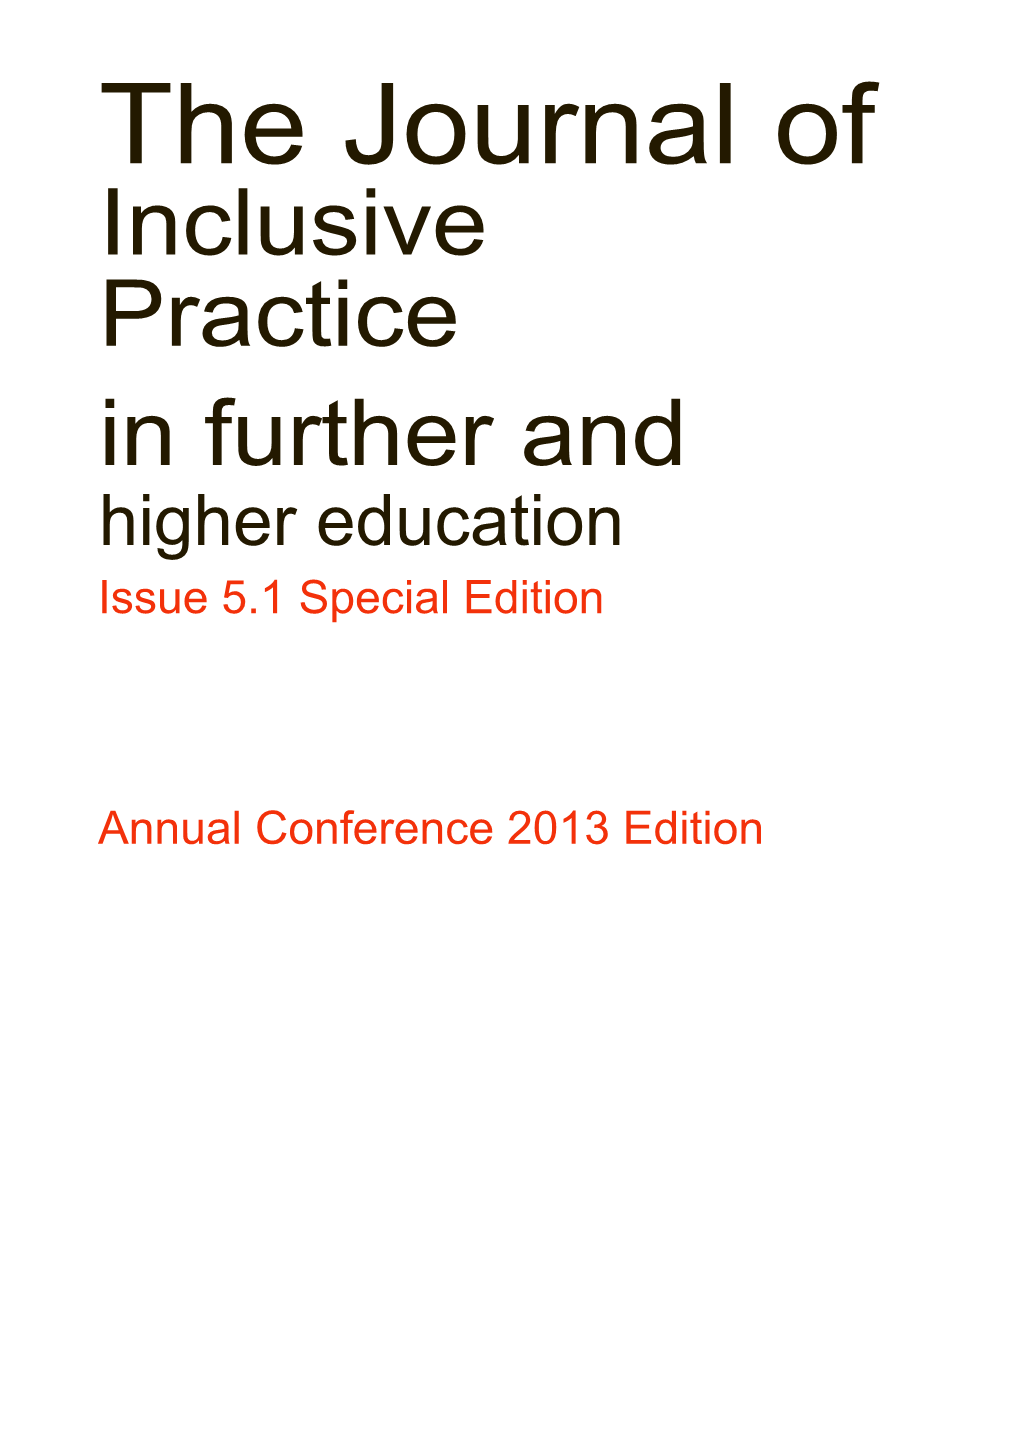 The Journal of Inclusive Practice